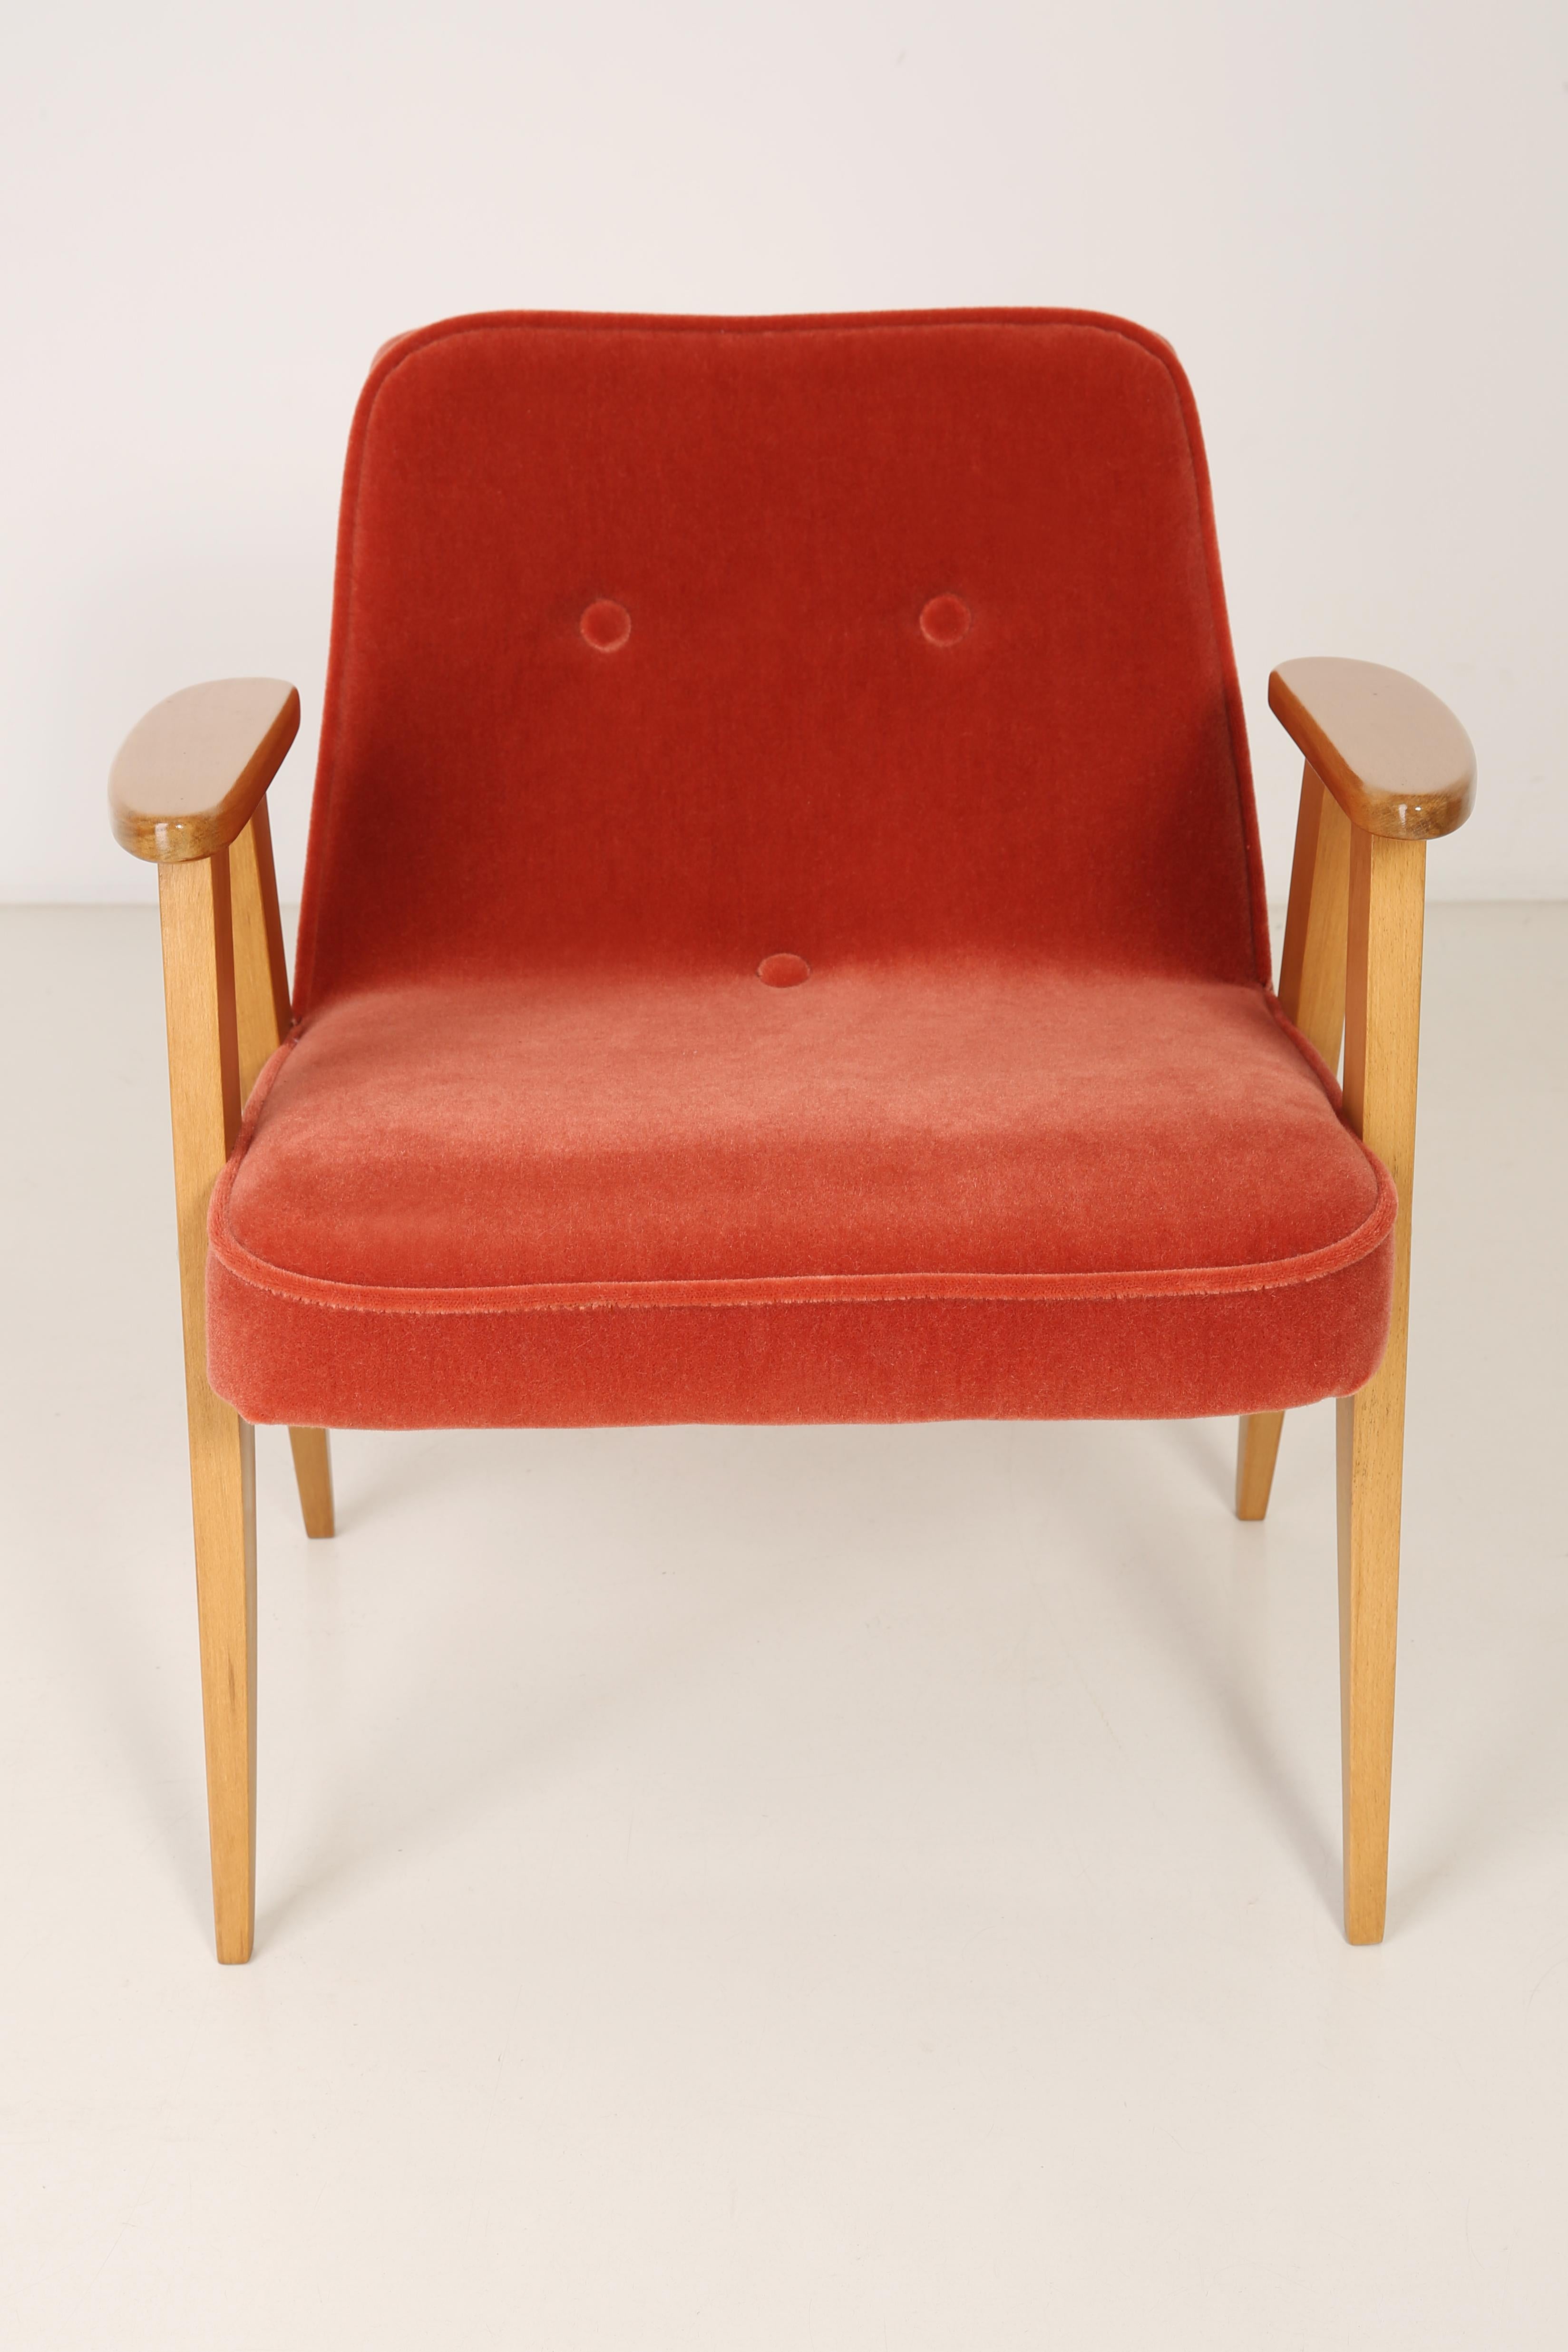 Polish Set of Two 366 Armchair, Jozef Chierowski, 1960s For Sale